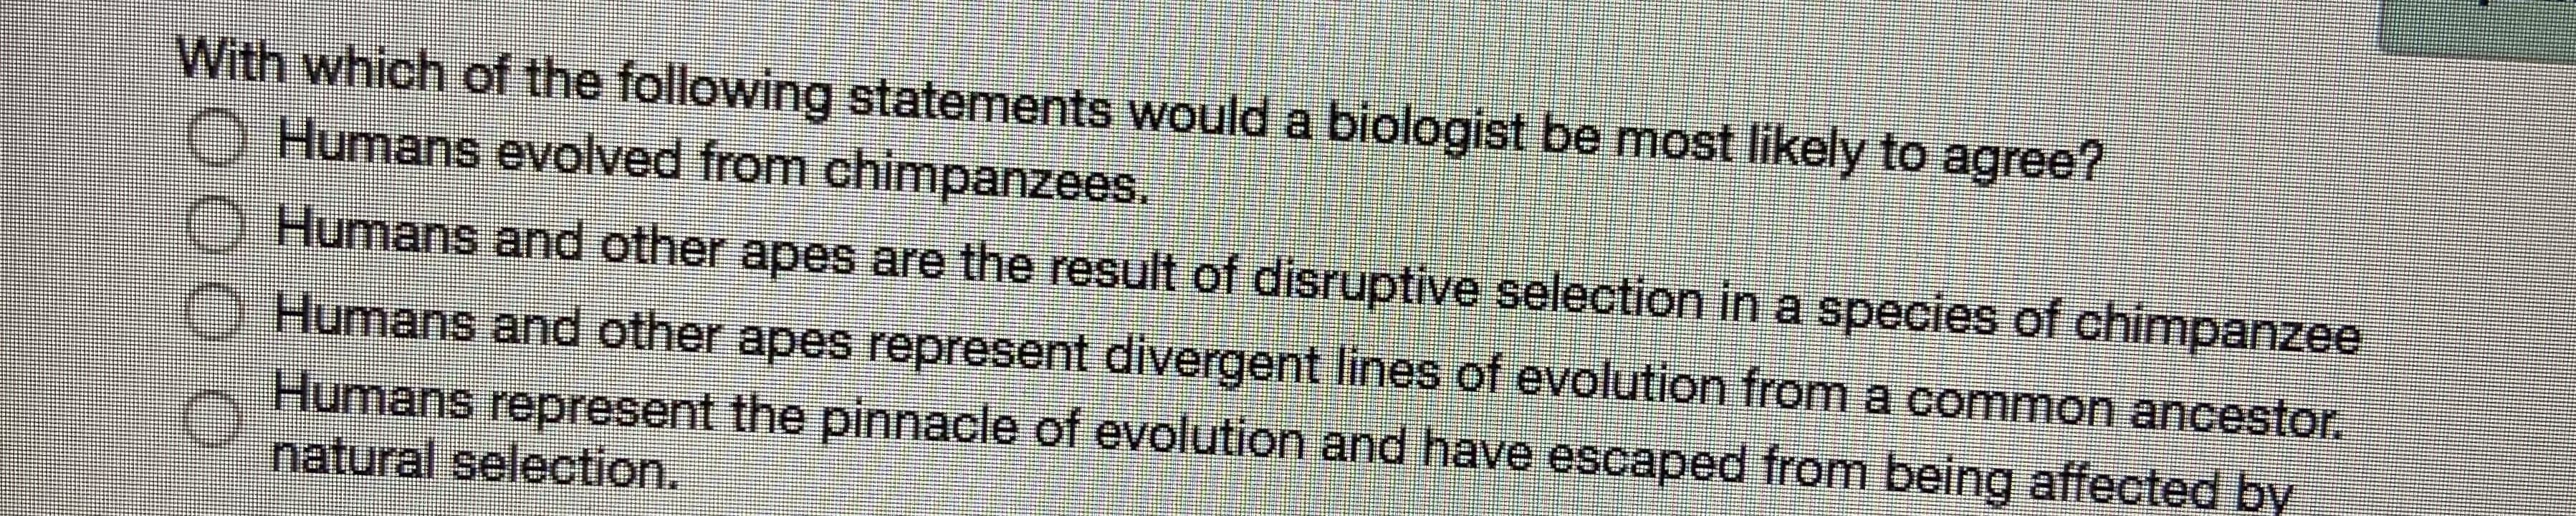 With which of the following statements would a biologist be most likely to agree?
O Humans evolved from chimpanzees.
Humans and other apes are the result of disruptive selection in a species of chimpanzee
O Humans and other apes represent divergent lines of evolution from a common ancestor.
Humans represent the pinnacle of evolution and have escaped from being affected by
natural selection.
